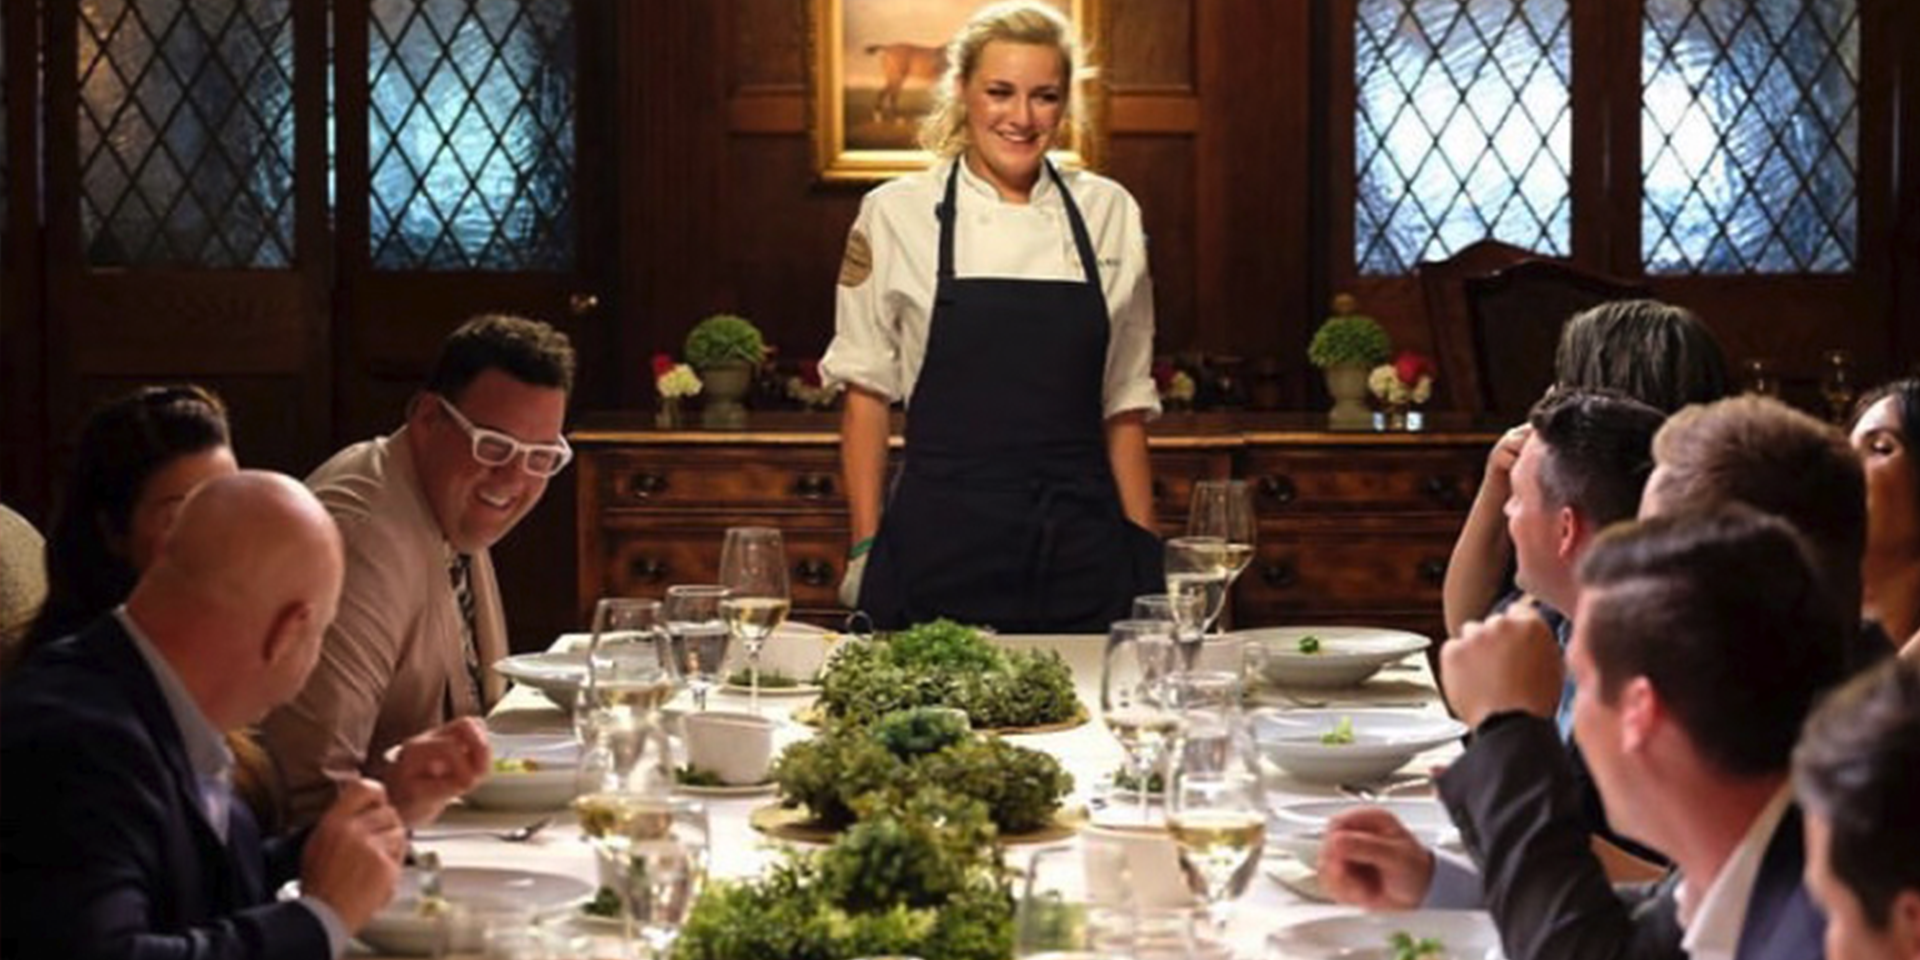 Top chef still, contestant stands before table